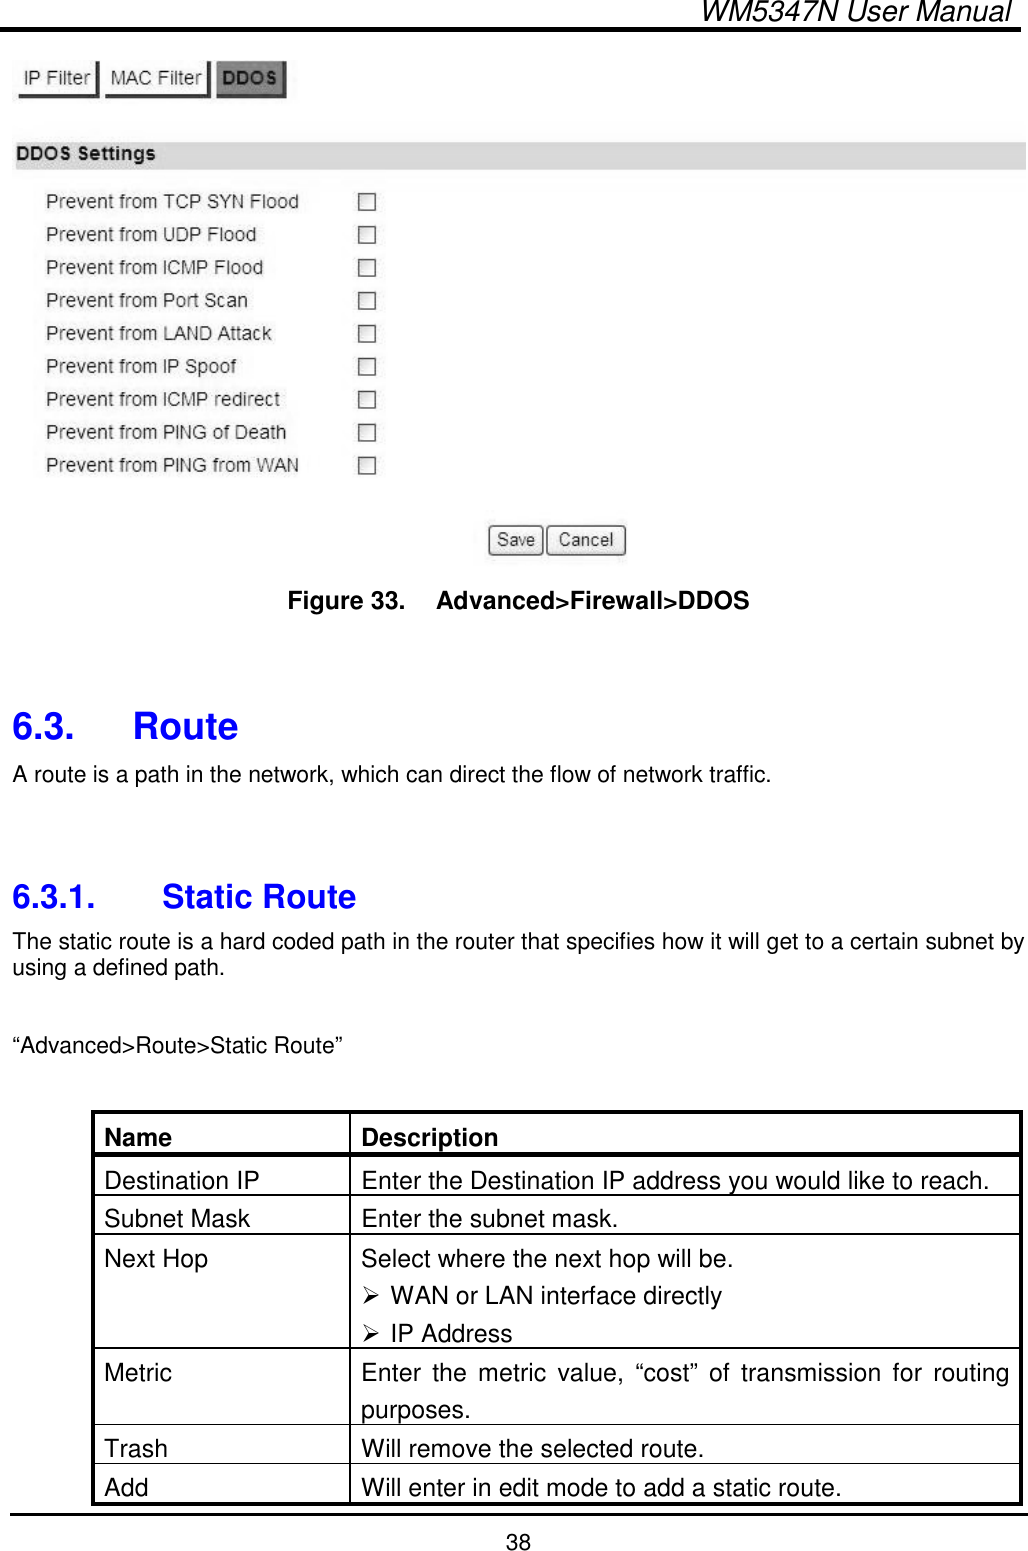  WM5347N User Manual  38  Figure 33.   Advanced&gt;Firewall&gt;DDOS   6.3.  Route A route is a path in the network, which can direct the flow of network traffic.   6.3.1.  Static Route The static route is a hard coded path in the router that specifies how it will get to a certain subnet by using a defined path.  “Advanced&gt;Route&gt;Static Route”  Name  Description Destination IP  Enter the Destination IP address you would like to reach. Subnet Mask  Enter the subnet mask. Next Hop  Select where the next hop will be.  WAN or LAN interface directly  IP Address Metric  Enter  the metric  value,  “cost”  of  transmission  for  routing purposes. Trash  Will remove the selected route. Add  Will enter in edit mode to add a static route. 